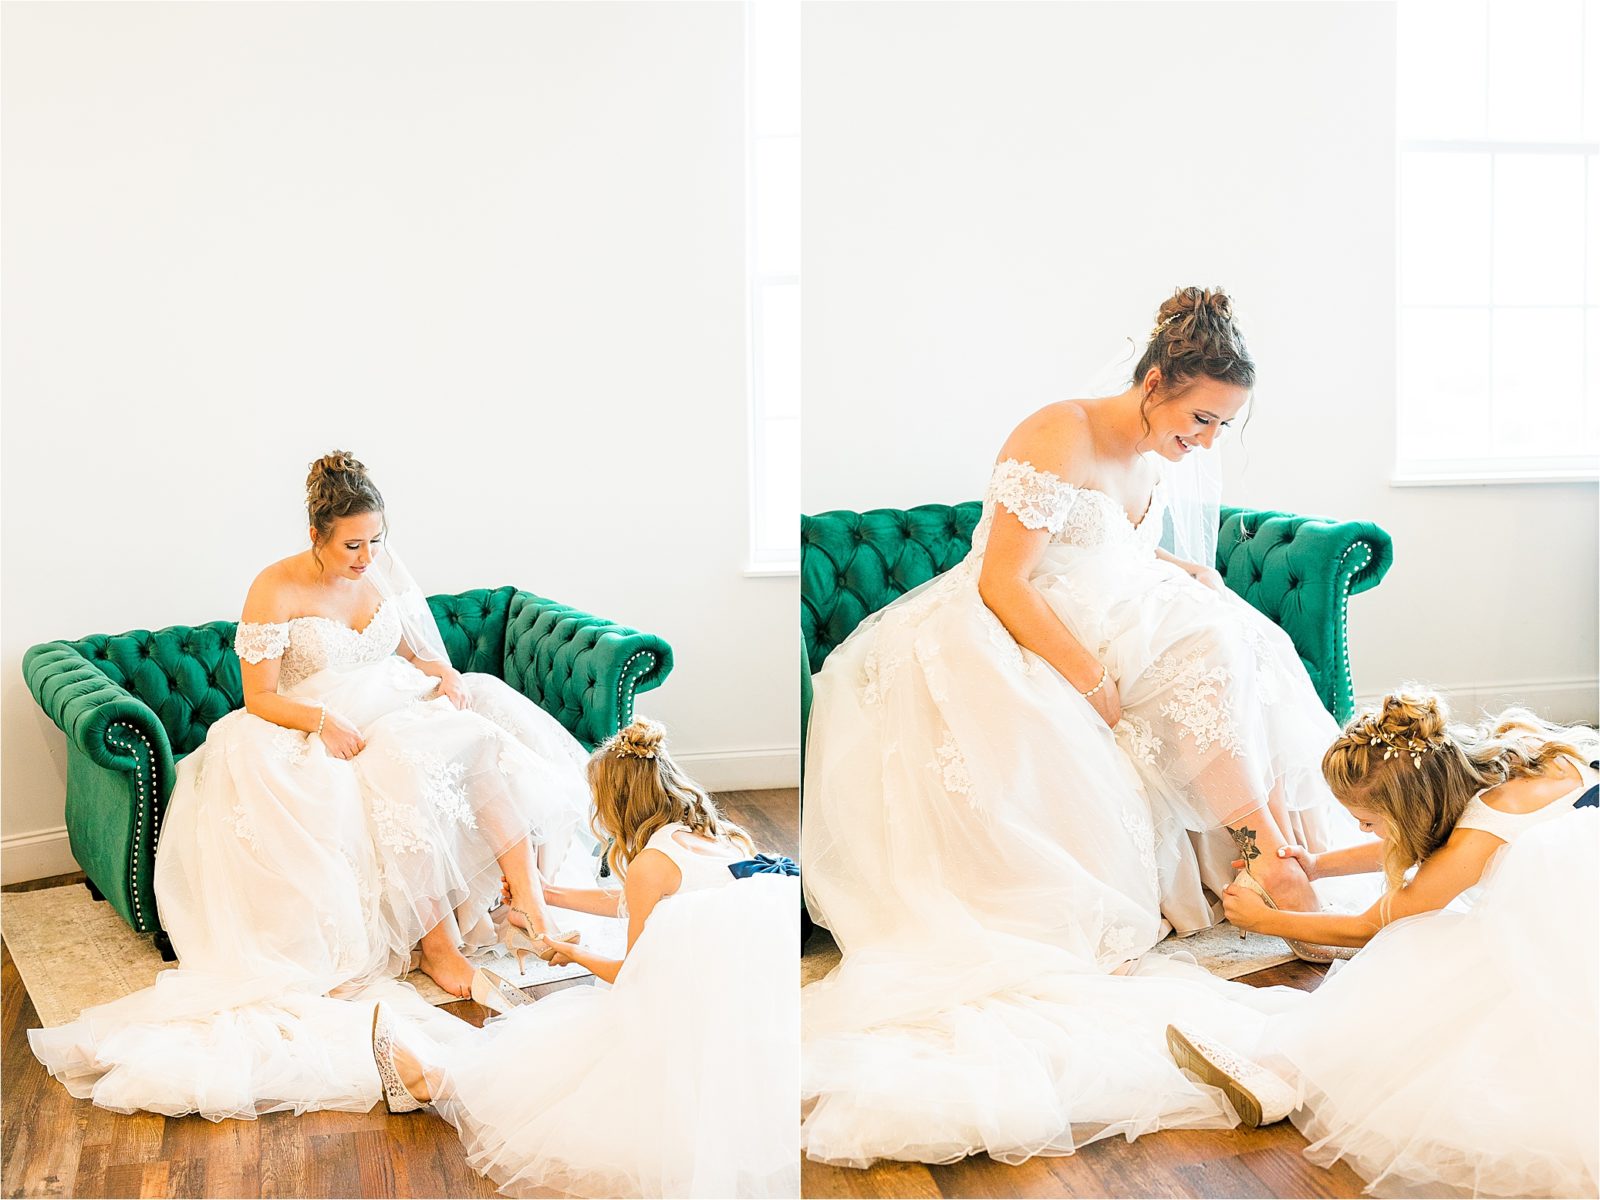 A young sister of the bride-to-be sits on the floor and helps slip on her wedding shoes before she walks down the aisle at Rustic Grace Estate 